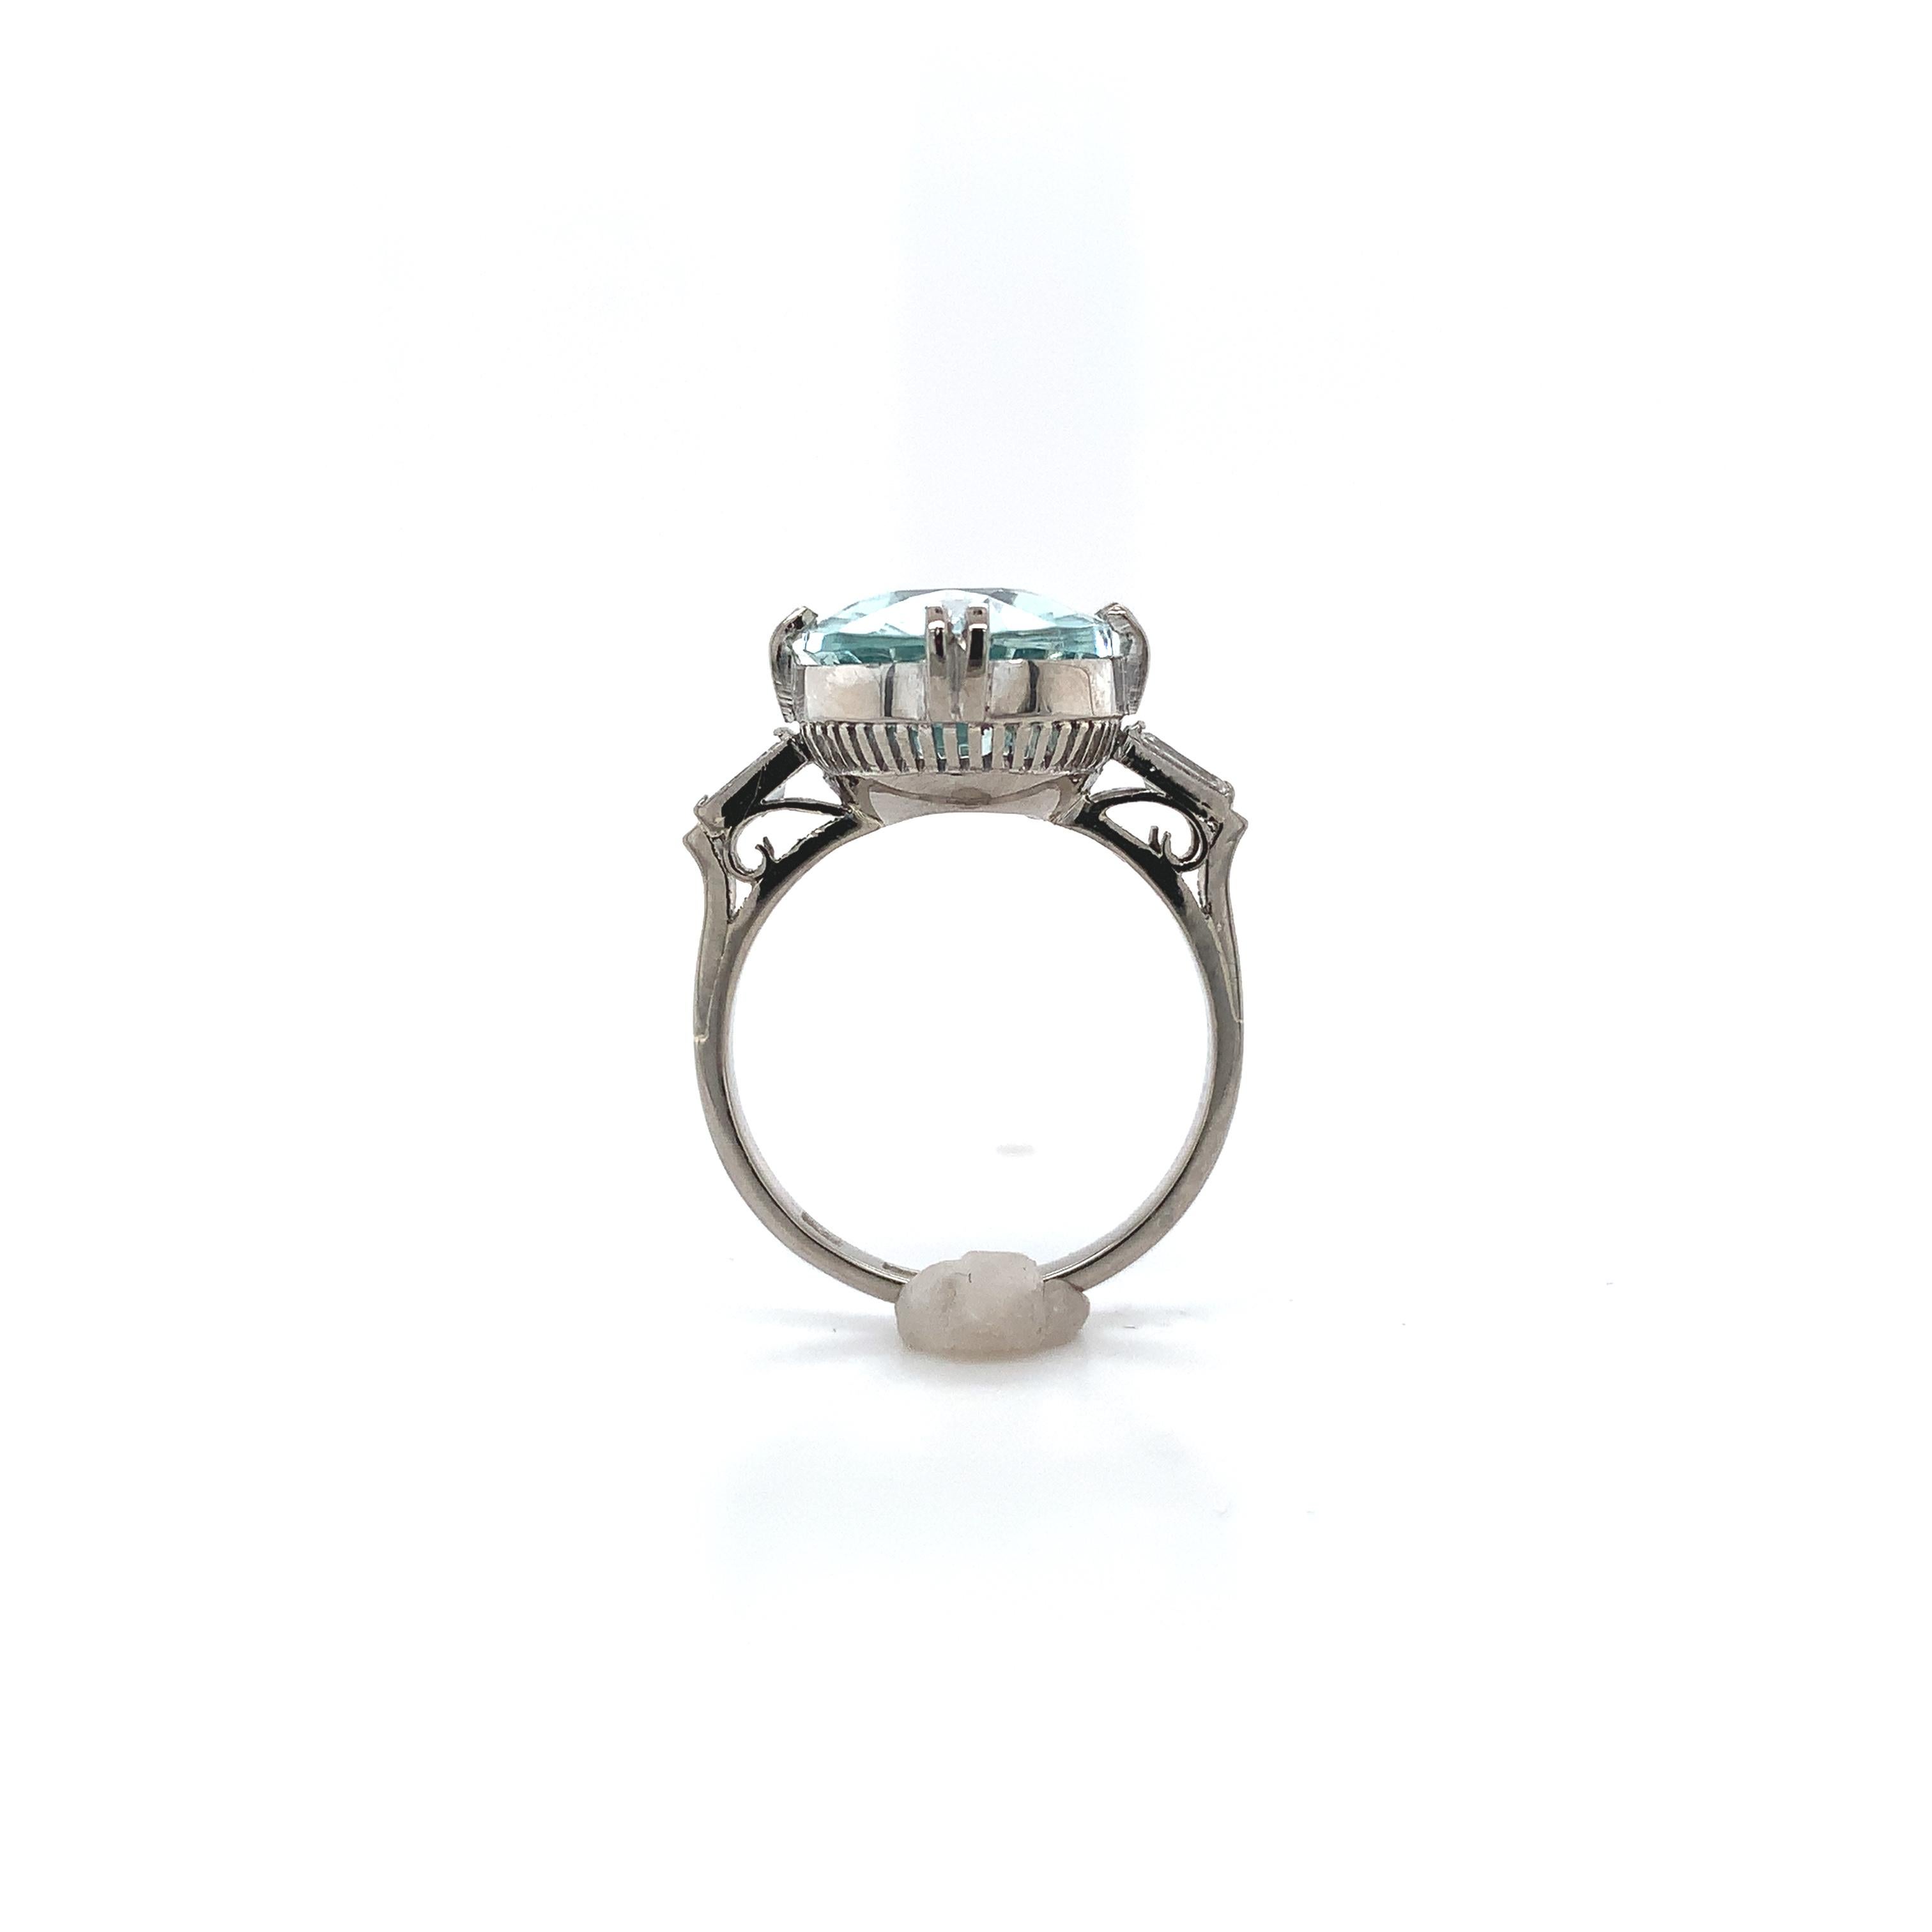 14K white gold 4.14 carat aquamarine ring. The light blue aquamarine is a beautiful specialty antique oval cut measuring about 13mm x 11mm. There are 2 diamond baguette accents measuring about 4mm x 2.3mm. The ring fits a size 5 finger and weighs